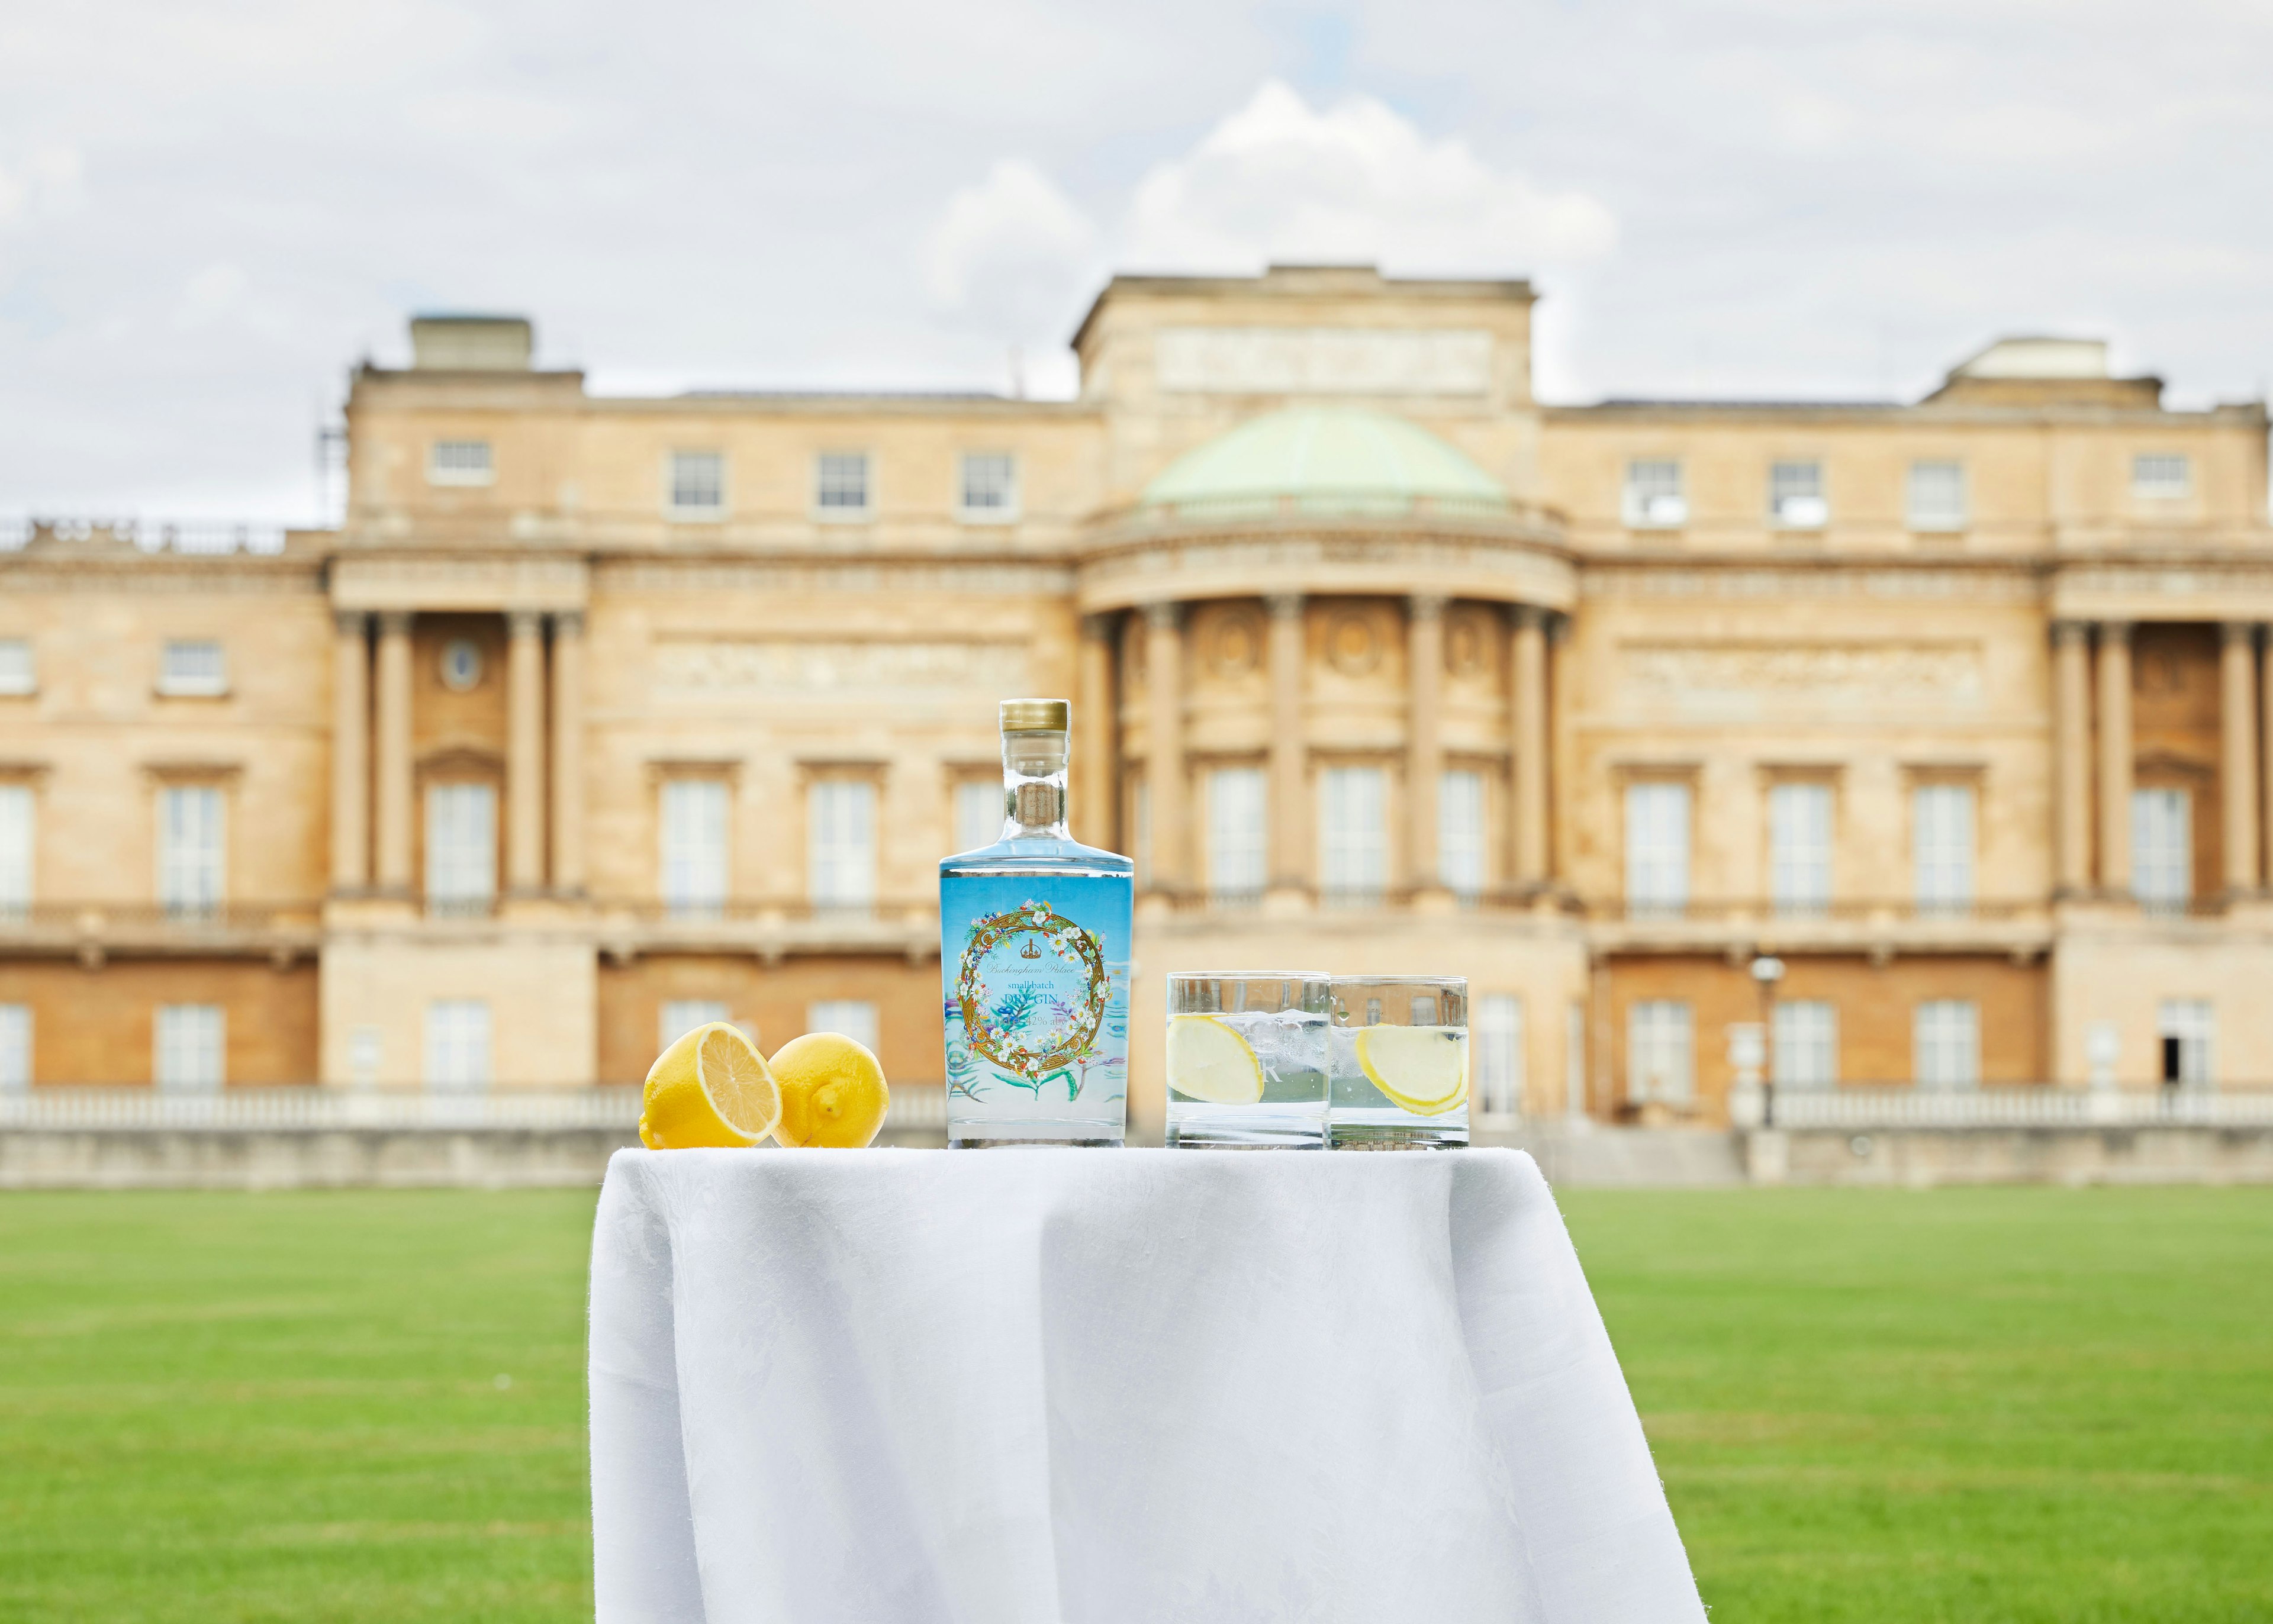 Buckingham Palace gin pictured in Buckingham Palace garden.<br/>.<br/>Credit: Royal Collection Trust/ c Her Majesty Queen Elizabeth II 2020. .<br/>.<br/>For single use only in relation to Buckingham Palace gin sold by Royal Collection Trust. Not to be archived or sold on..<br/>